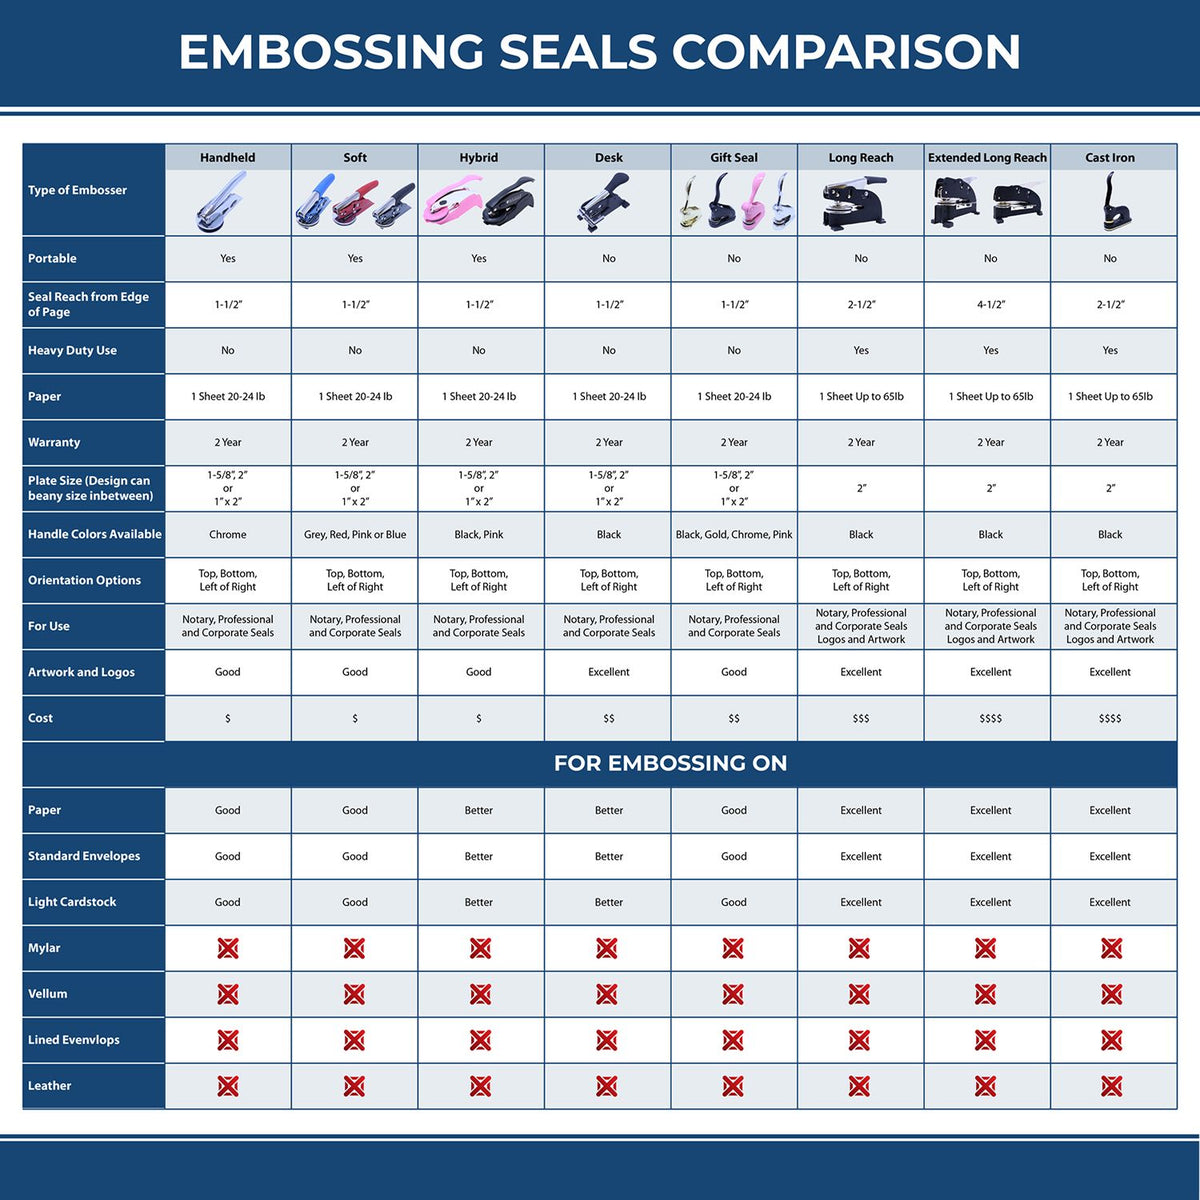 A comparison chart for the different types of mount models available for the Handheld New Mexico Architect Seal Embosser.